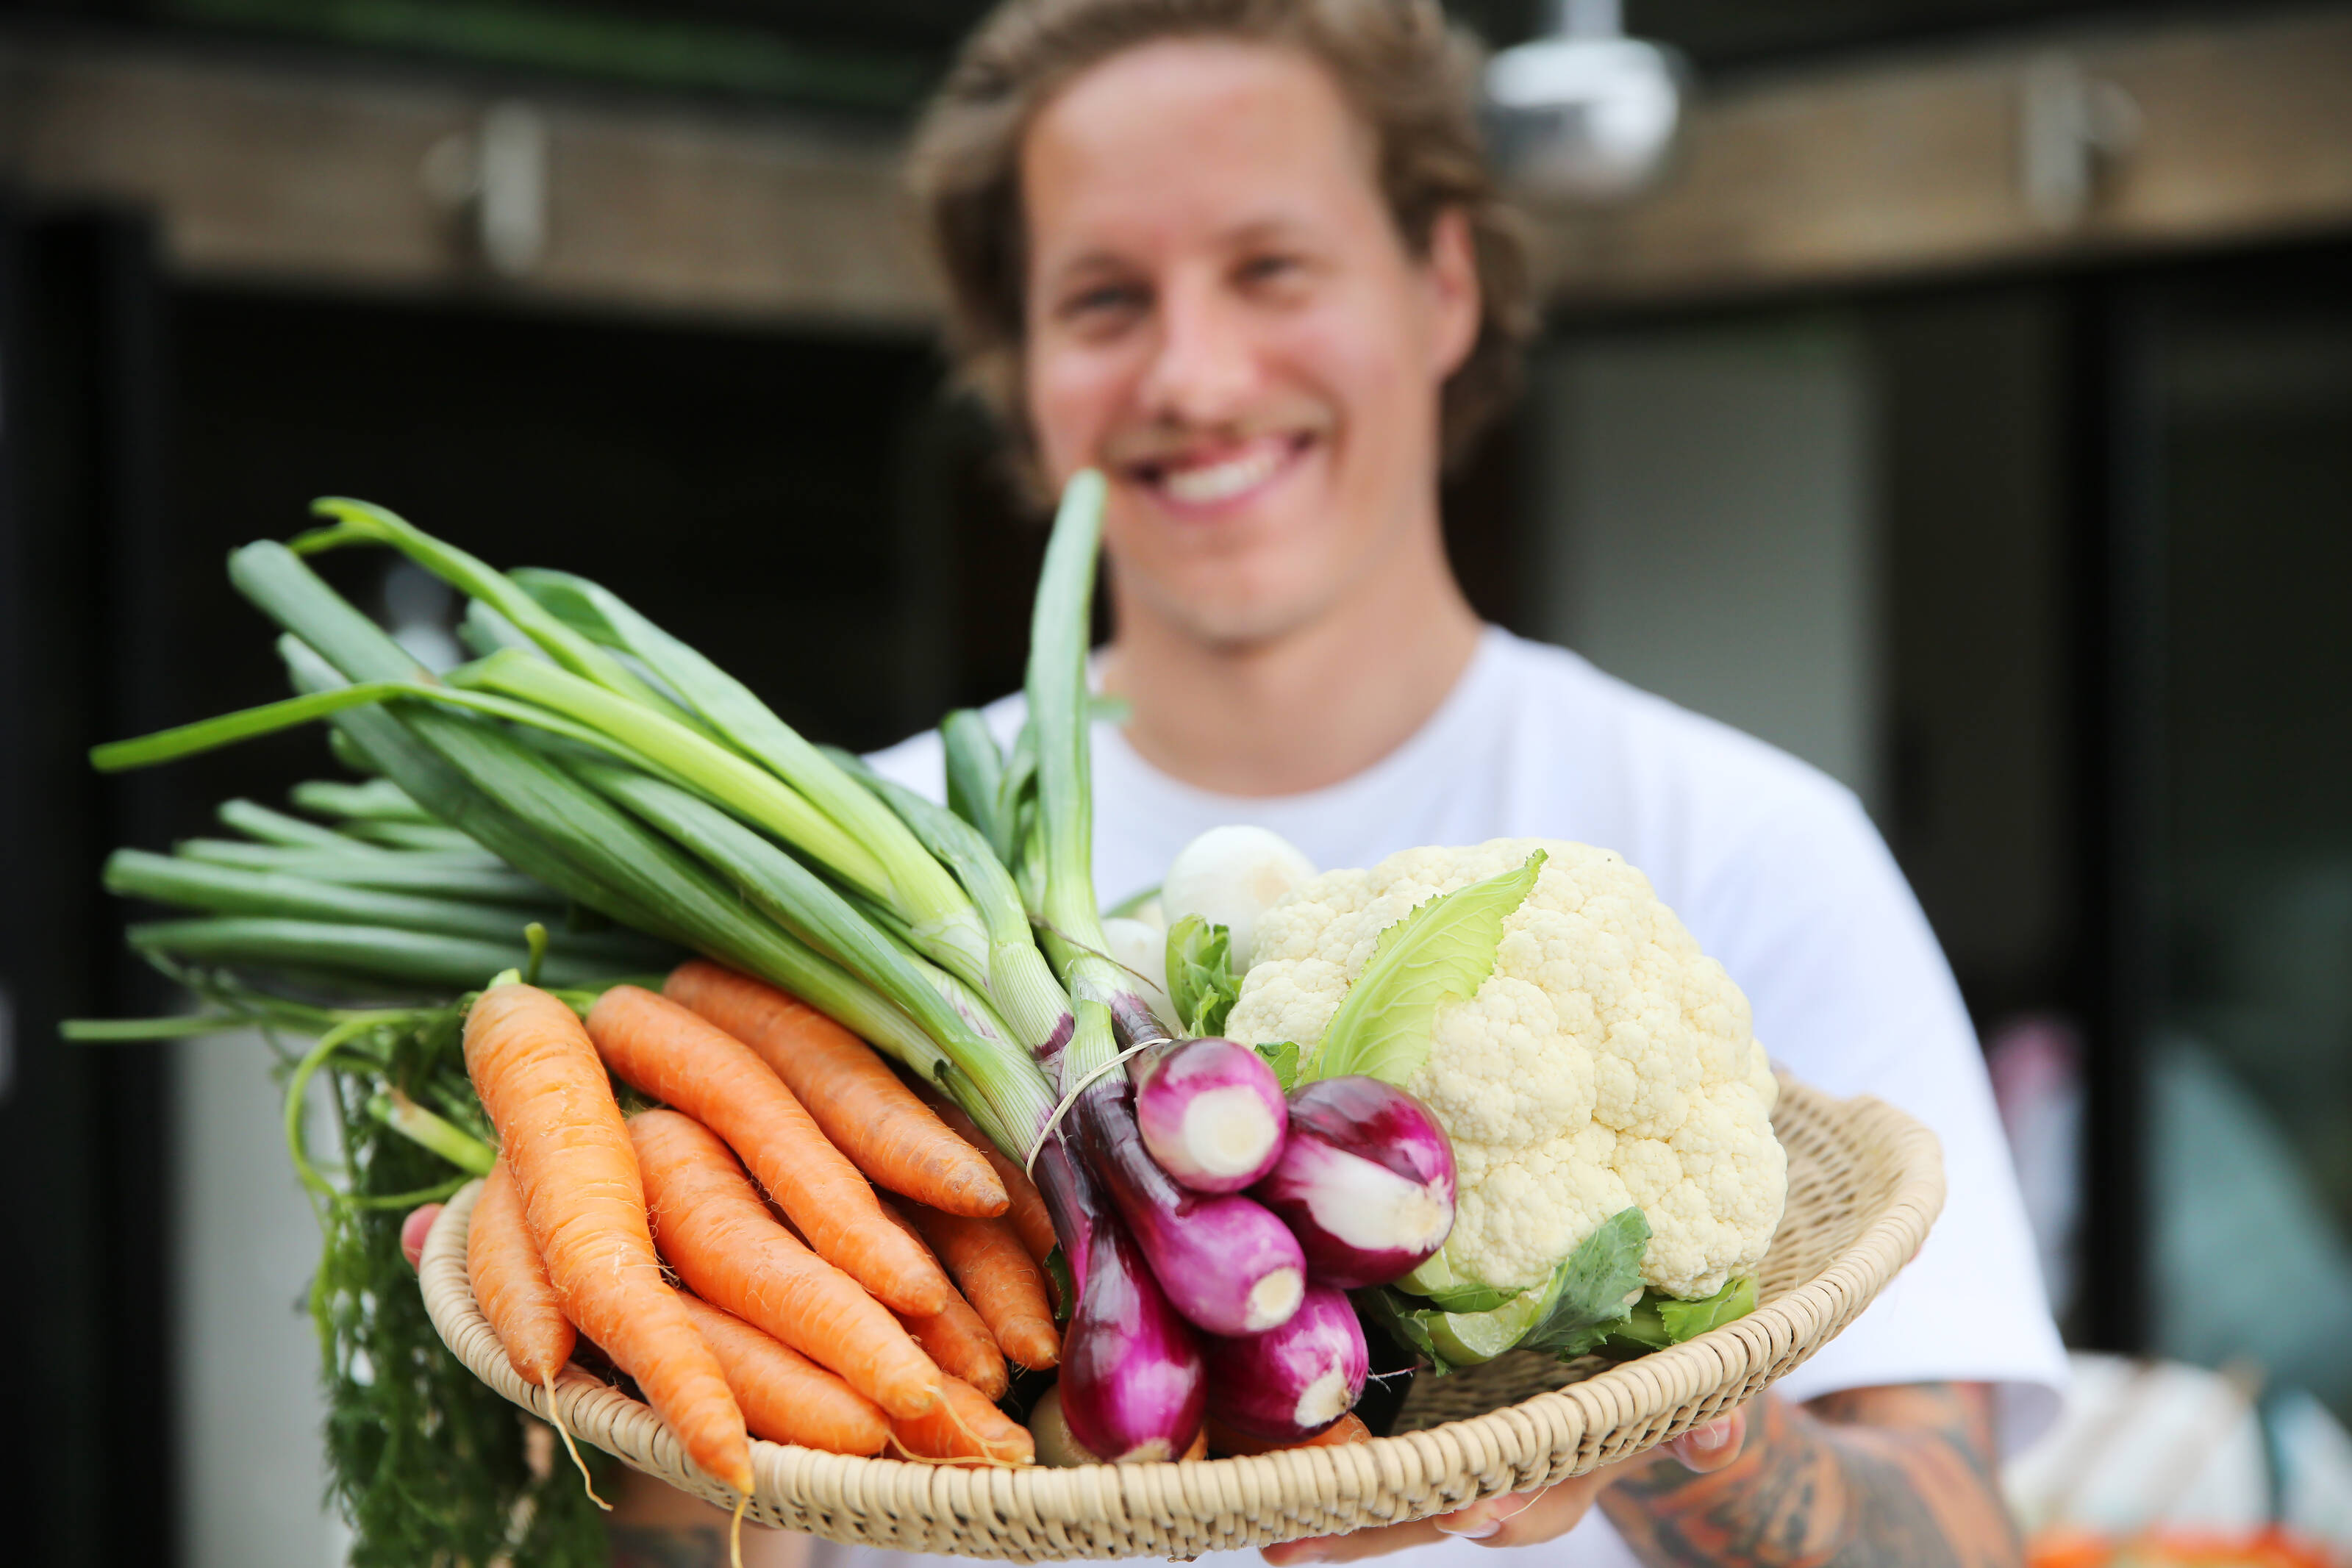 a man is holding a weaved tray full of fresh Finnish vegetables